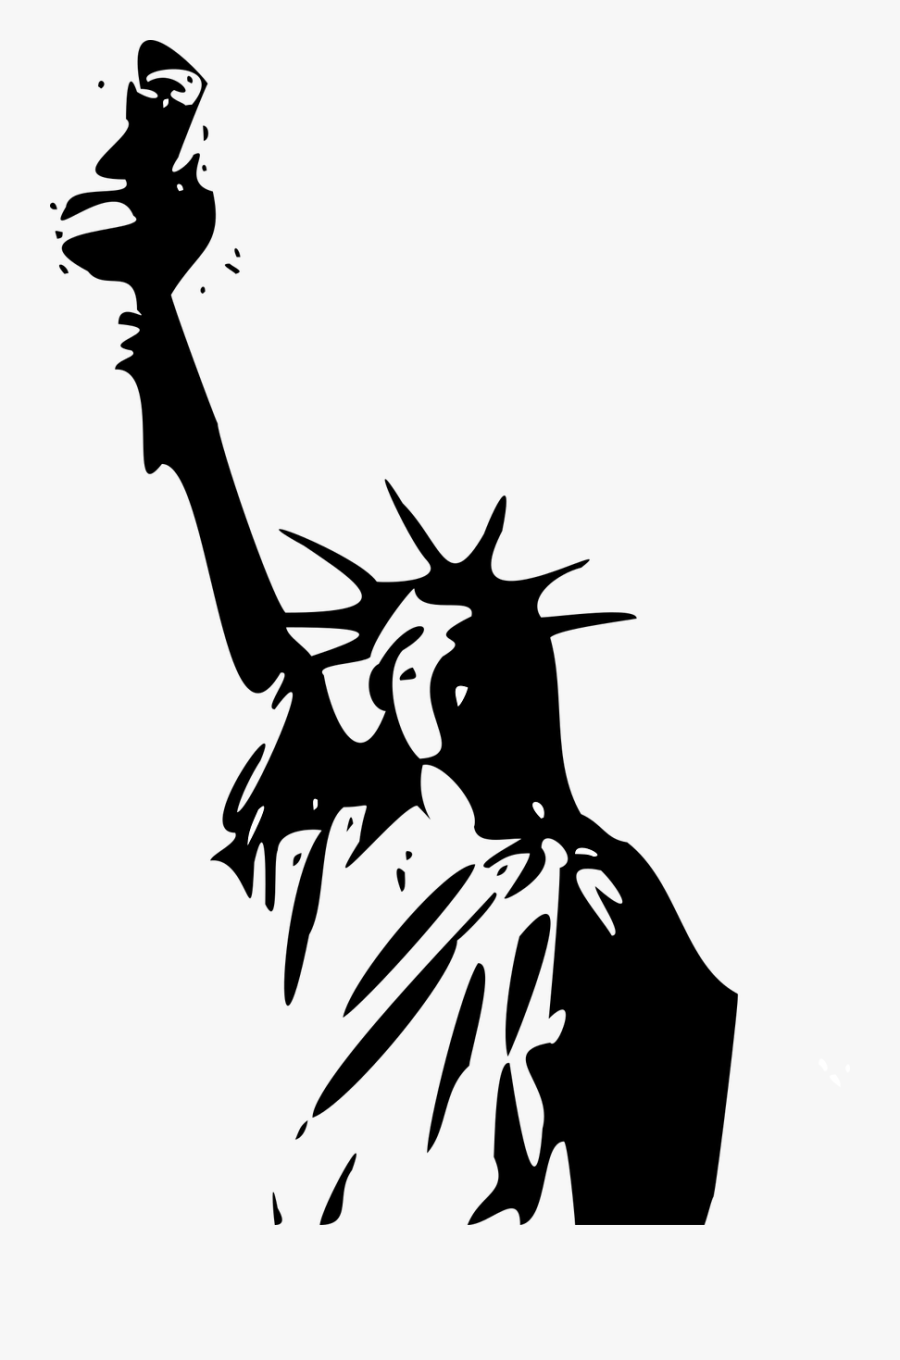 Statue New York Freedom - Statue Of Liberty Freedom Art, Transparent Clipart